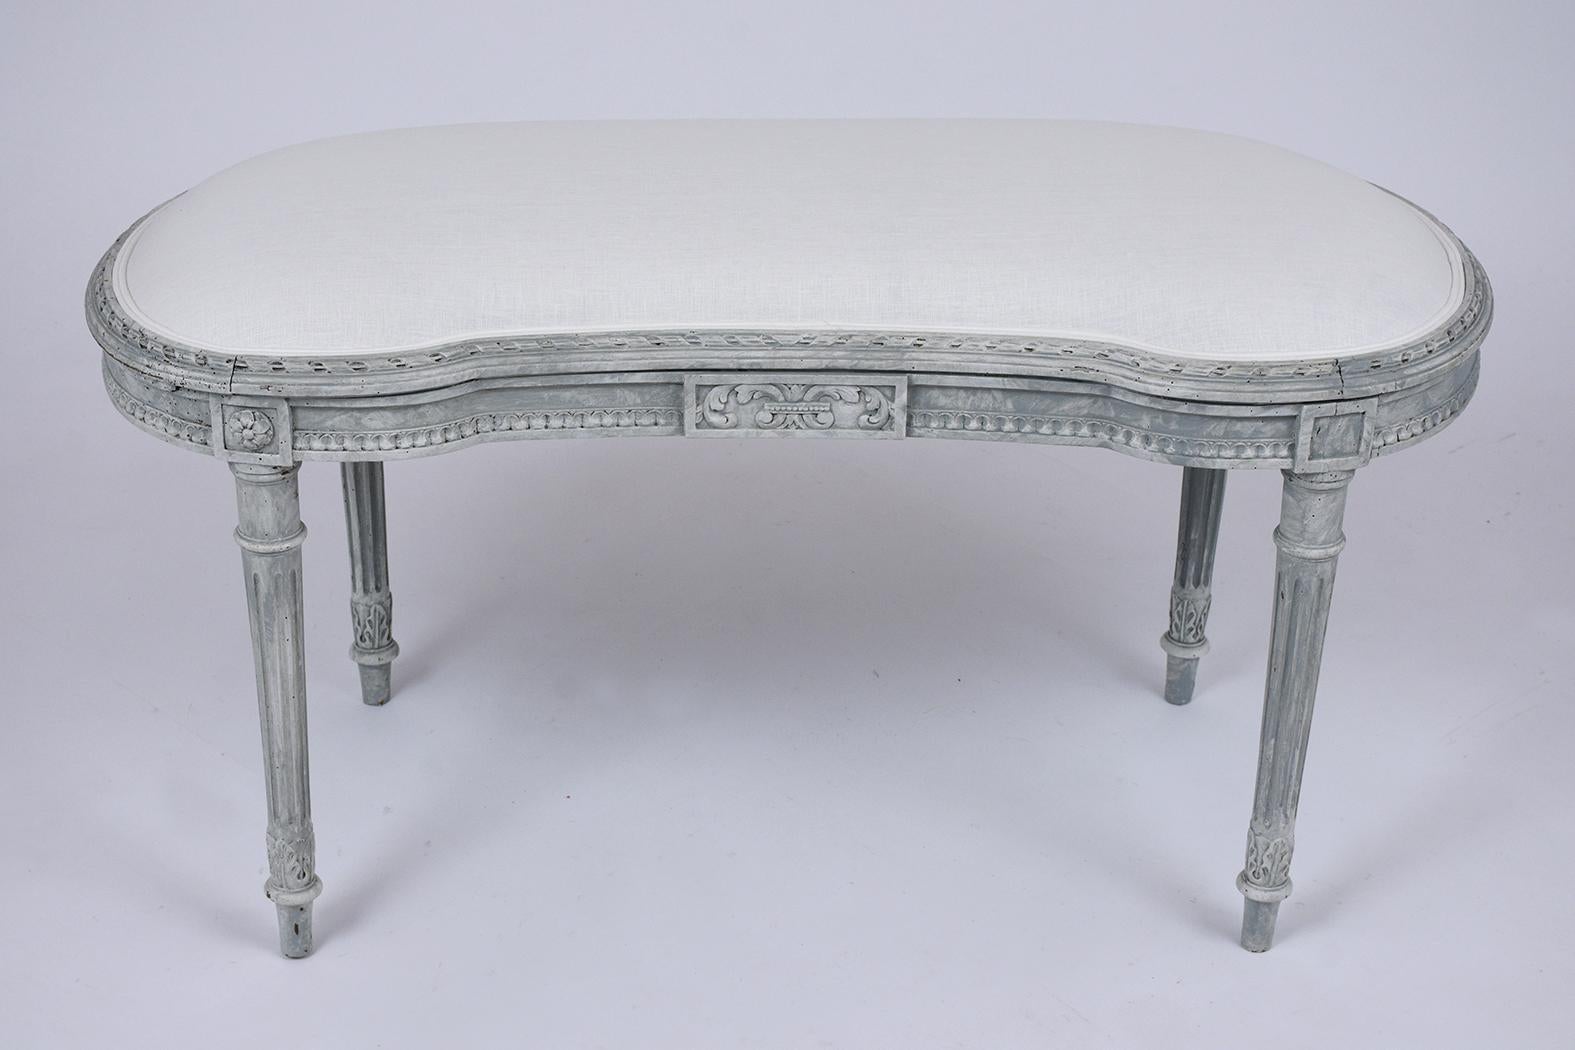 This antique French Louis XVI bench is made out of walnut wood and has been completely restored by our team of expert craftsmen. This late 19th-century bench features a kidney shape frame with finely hand-carved details, a new hand-painted pale gray